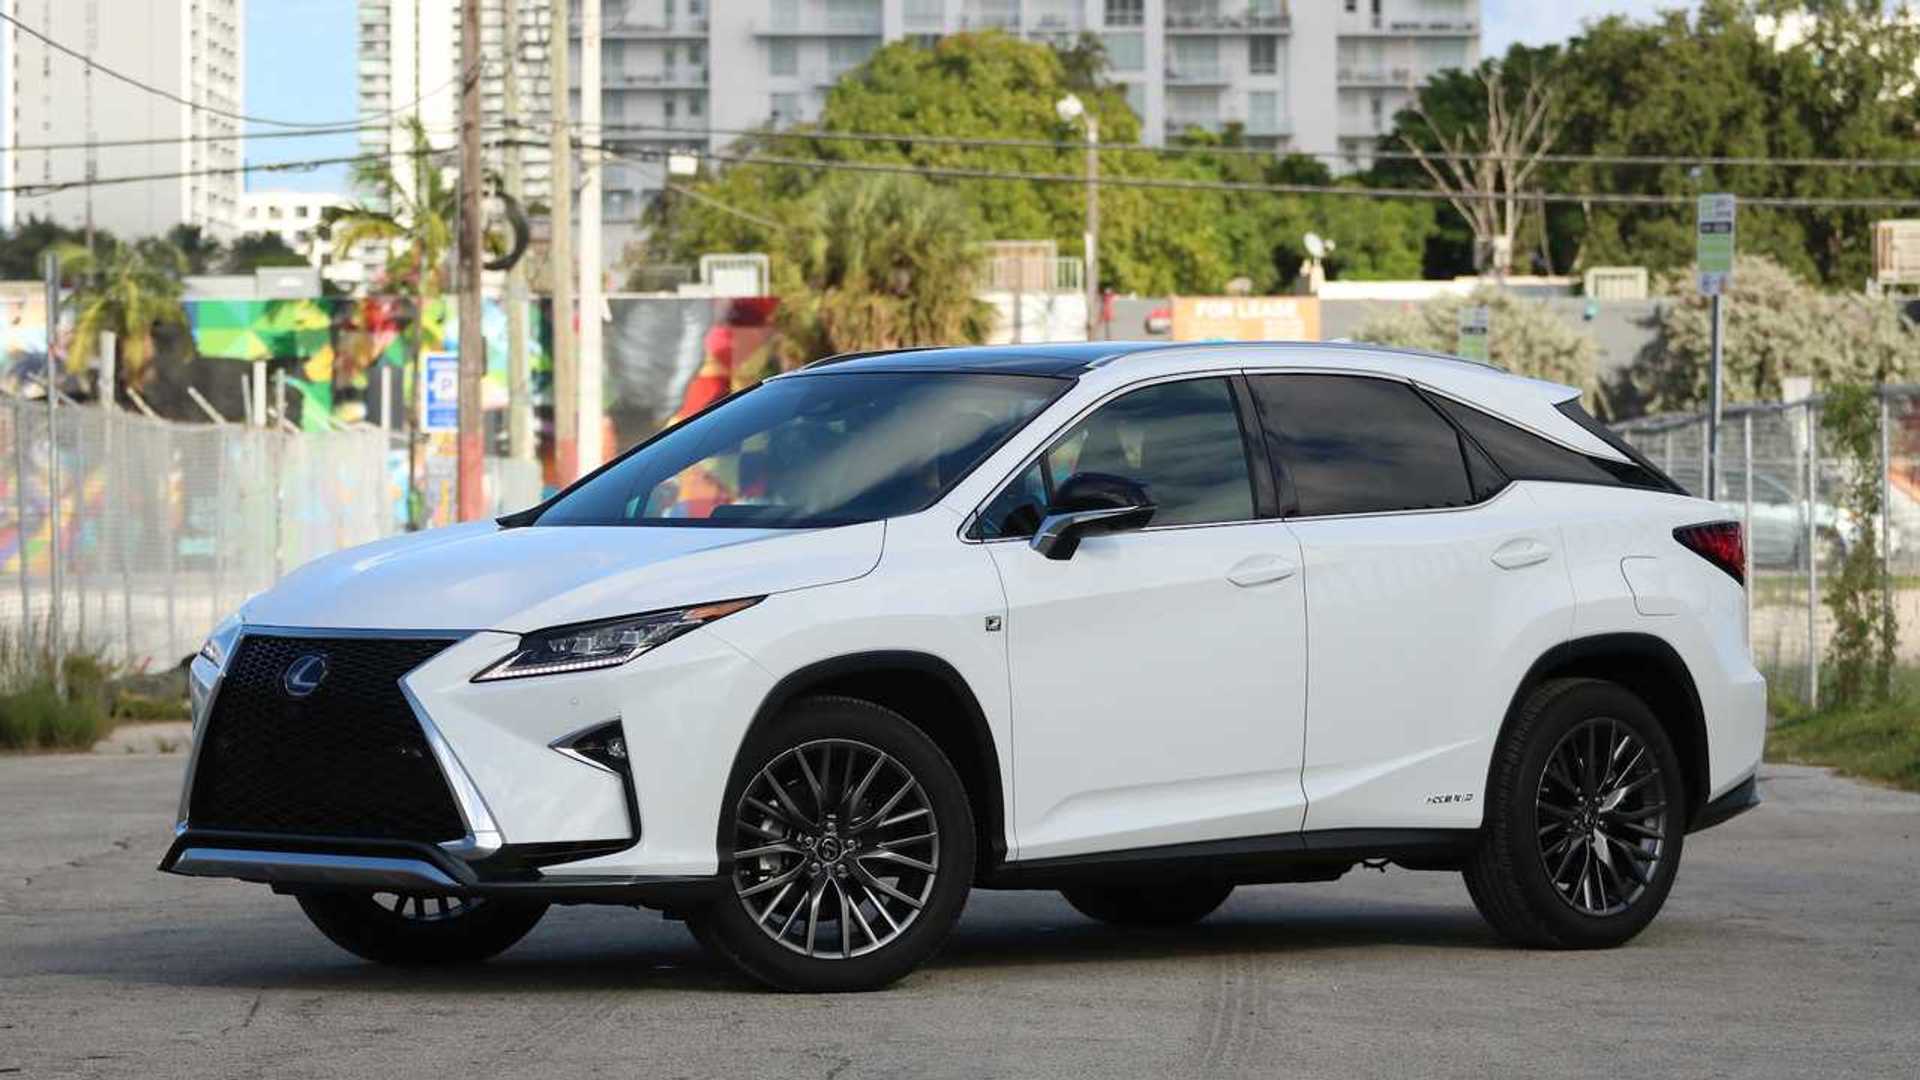 2018 Lexus RX 450h Review: The Original Luxury Crossover SUV